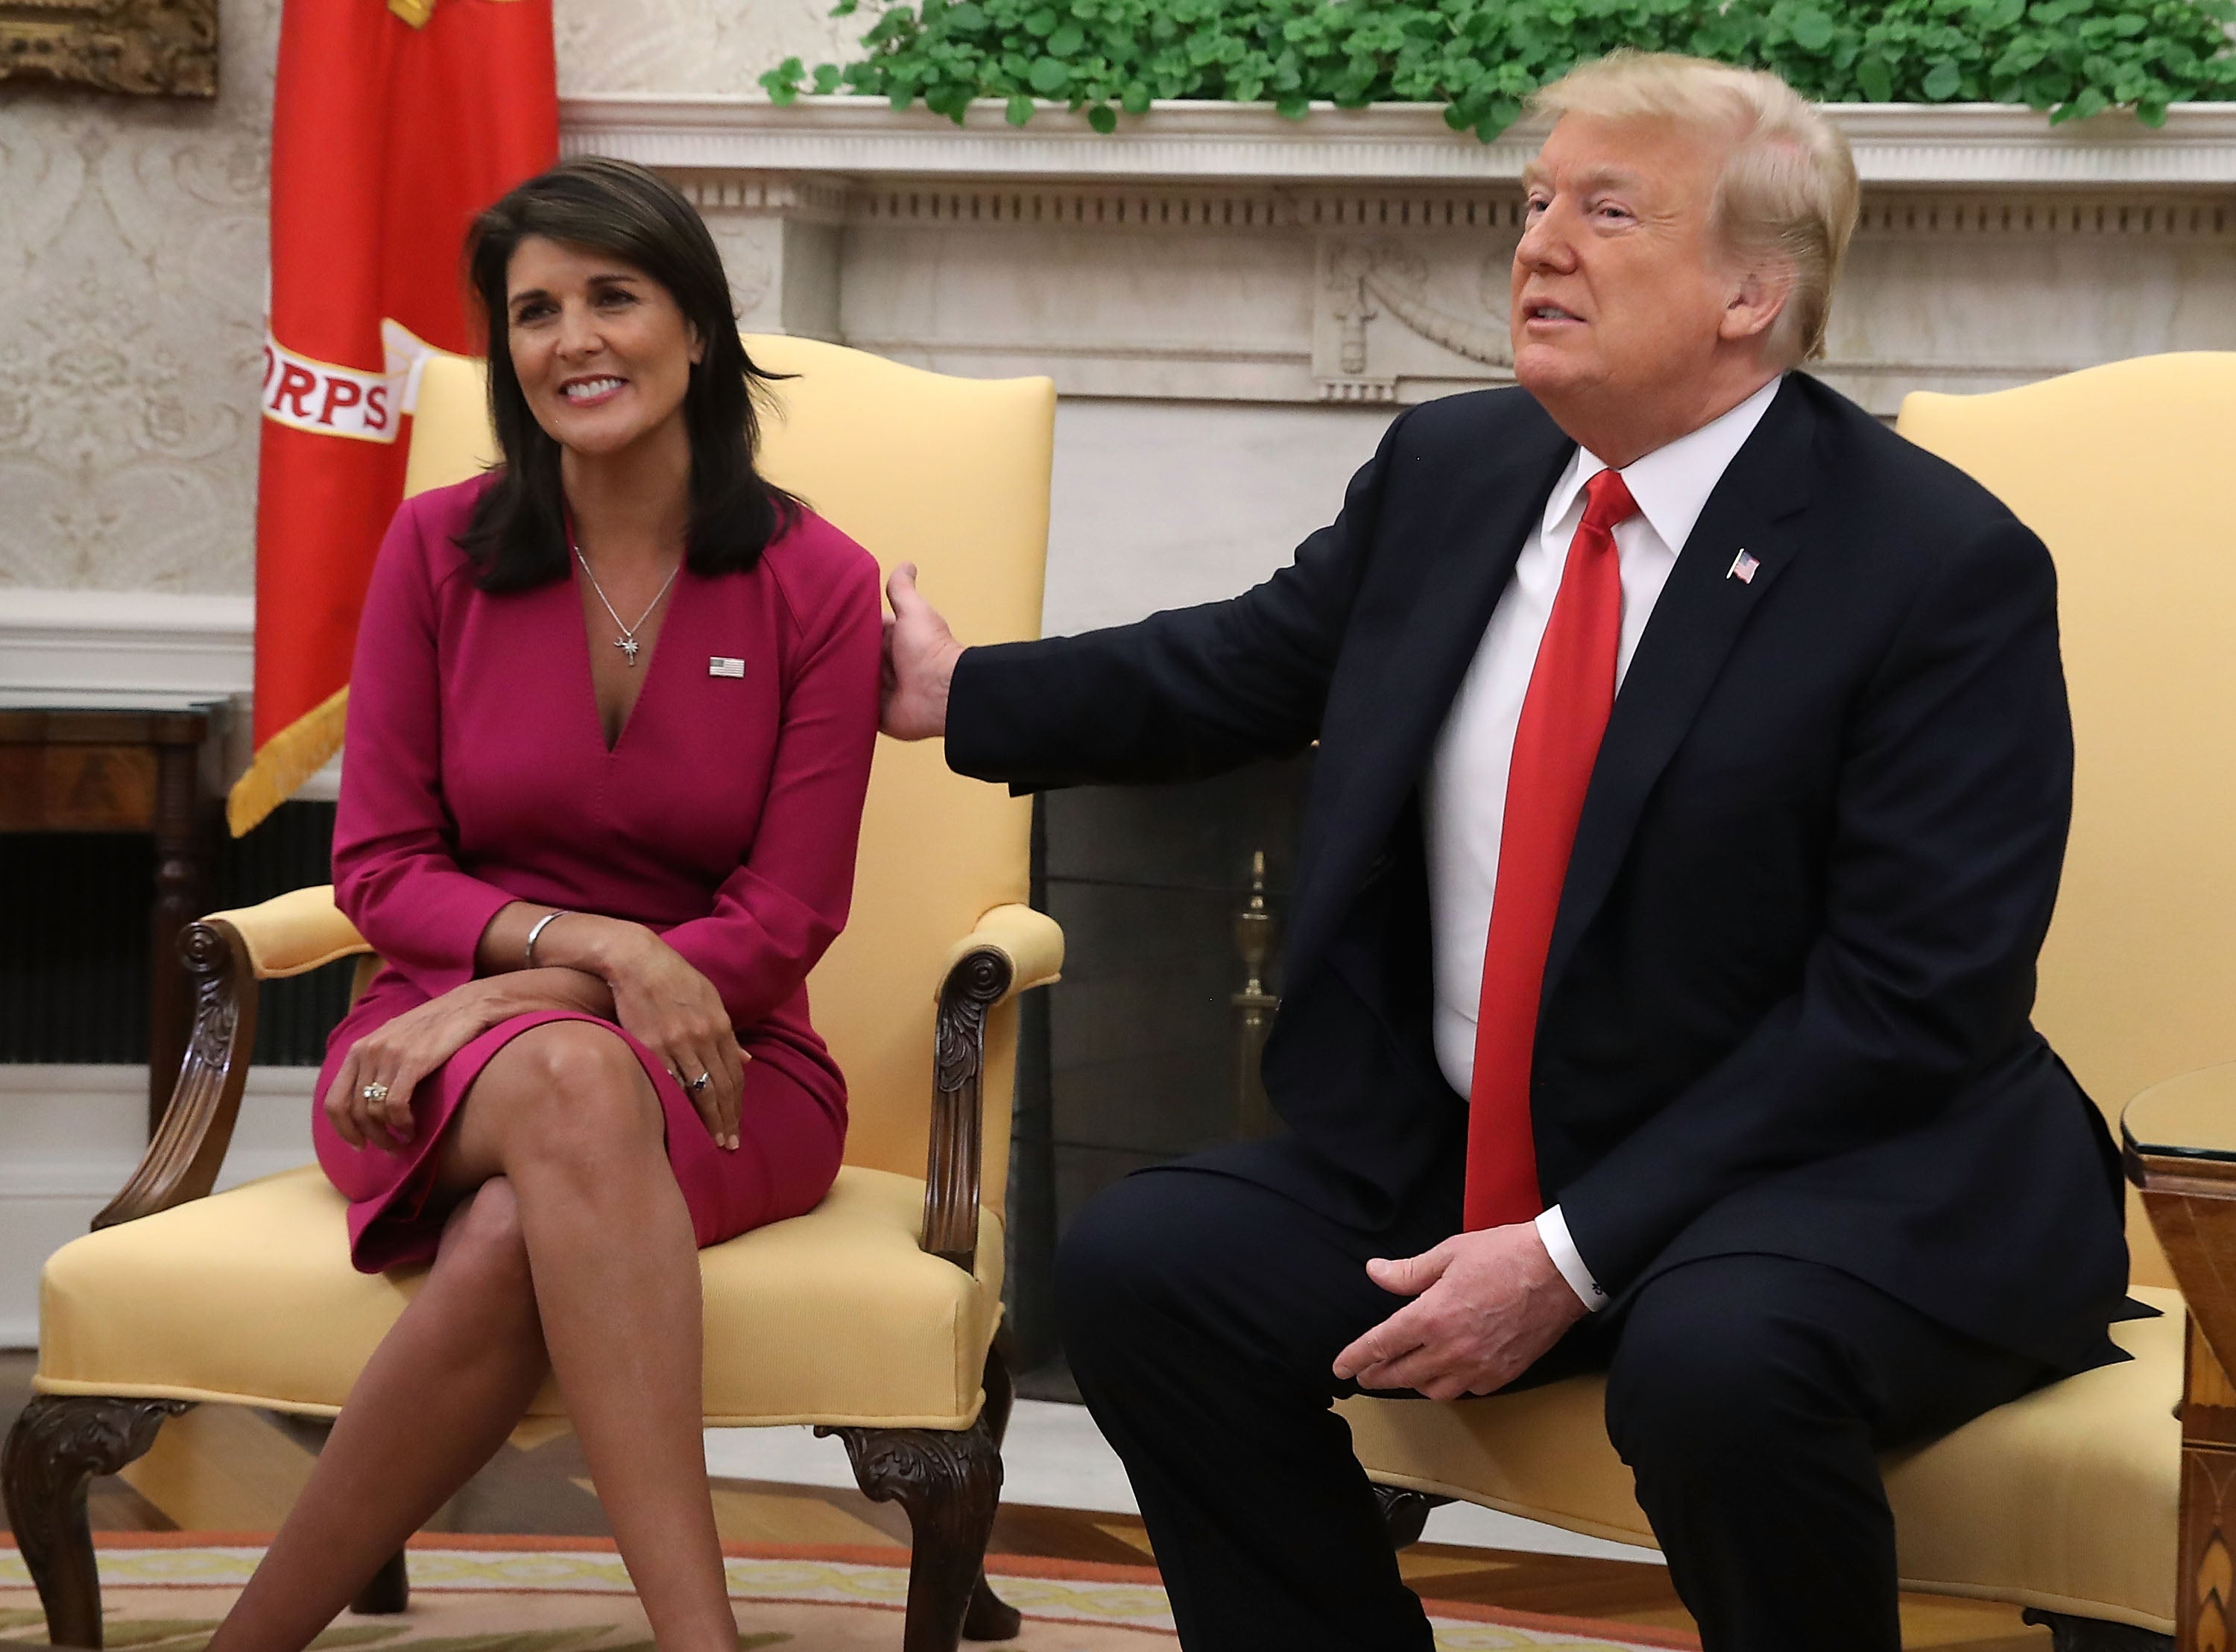 Trump pictured with Nikki Haley, the then US ambassador to the UN, in 2018